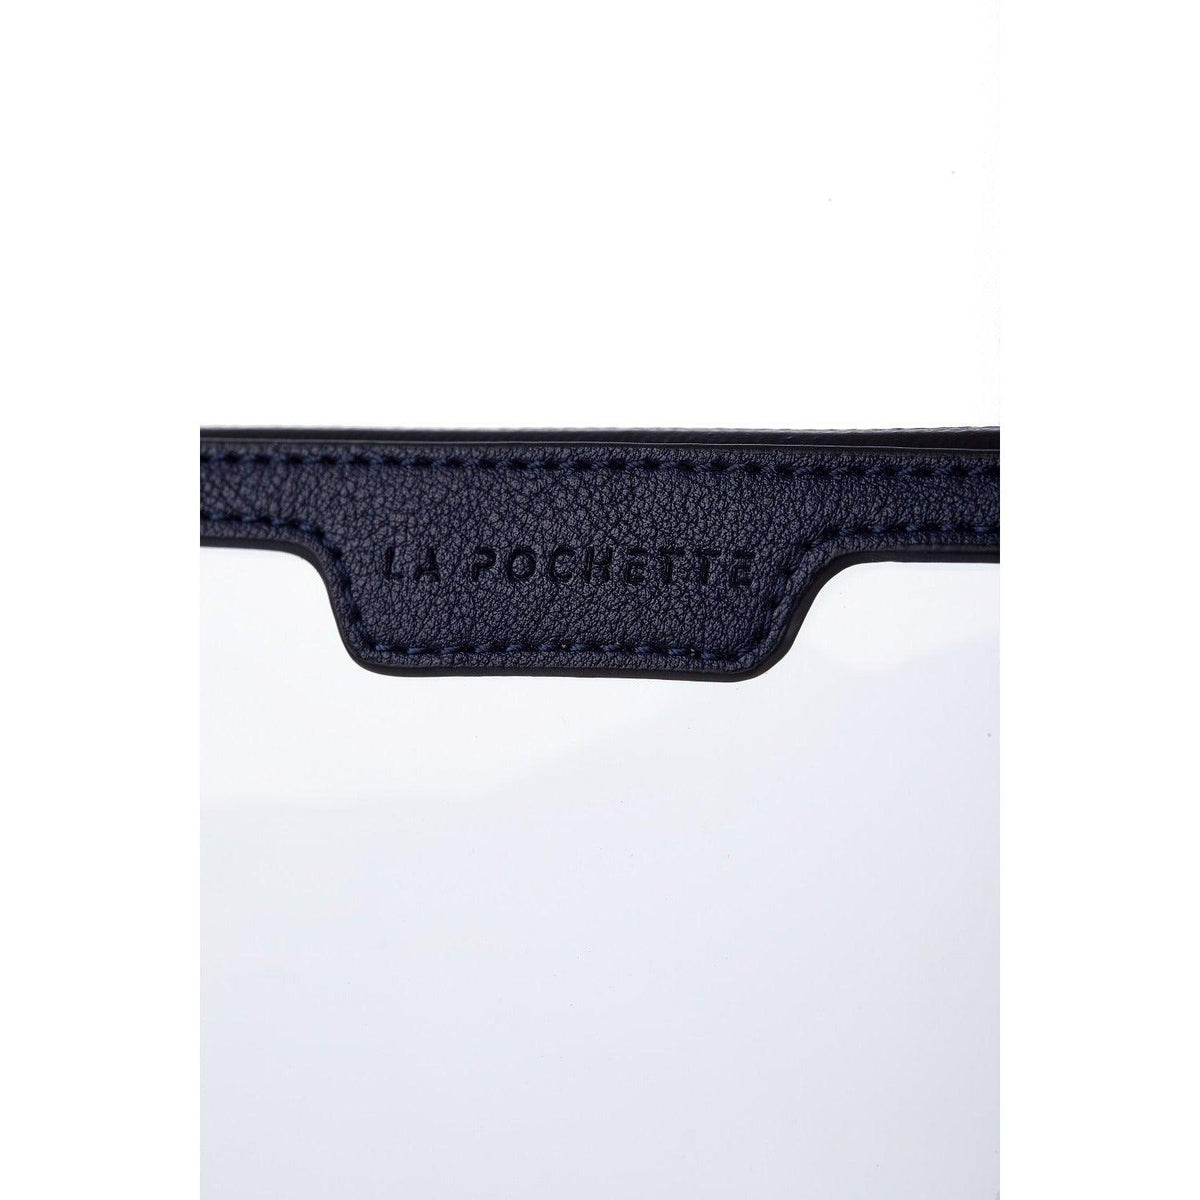 Small Anywhere Everywhere Pouch in Midnight Ink colourway, showing Logo detail